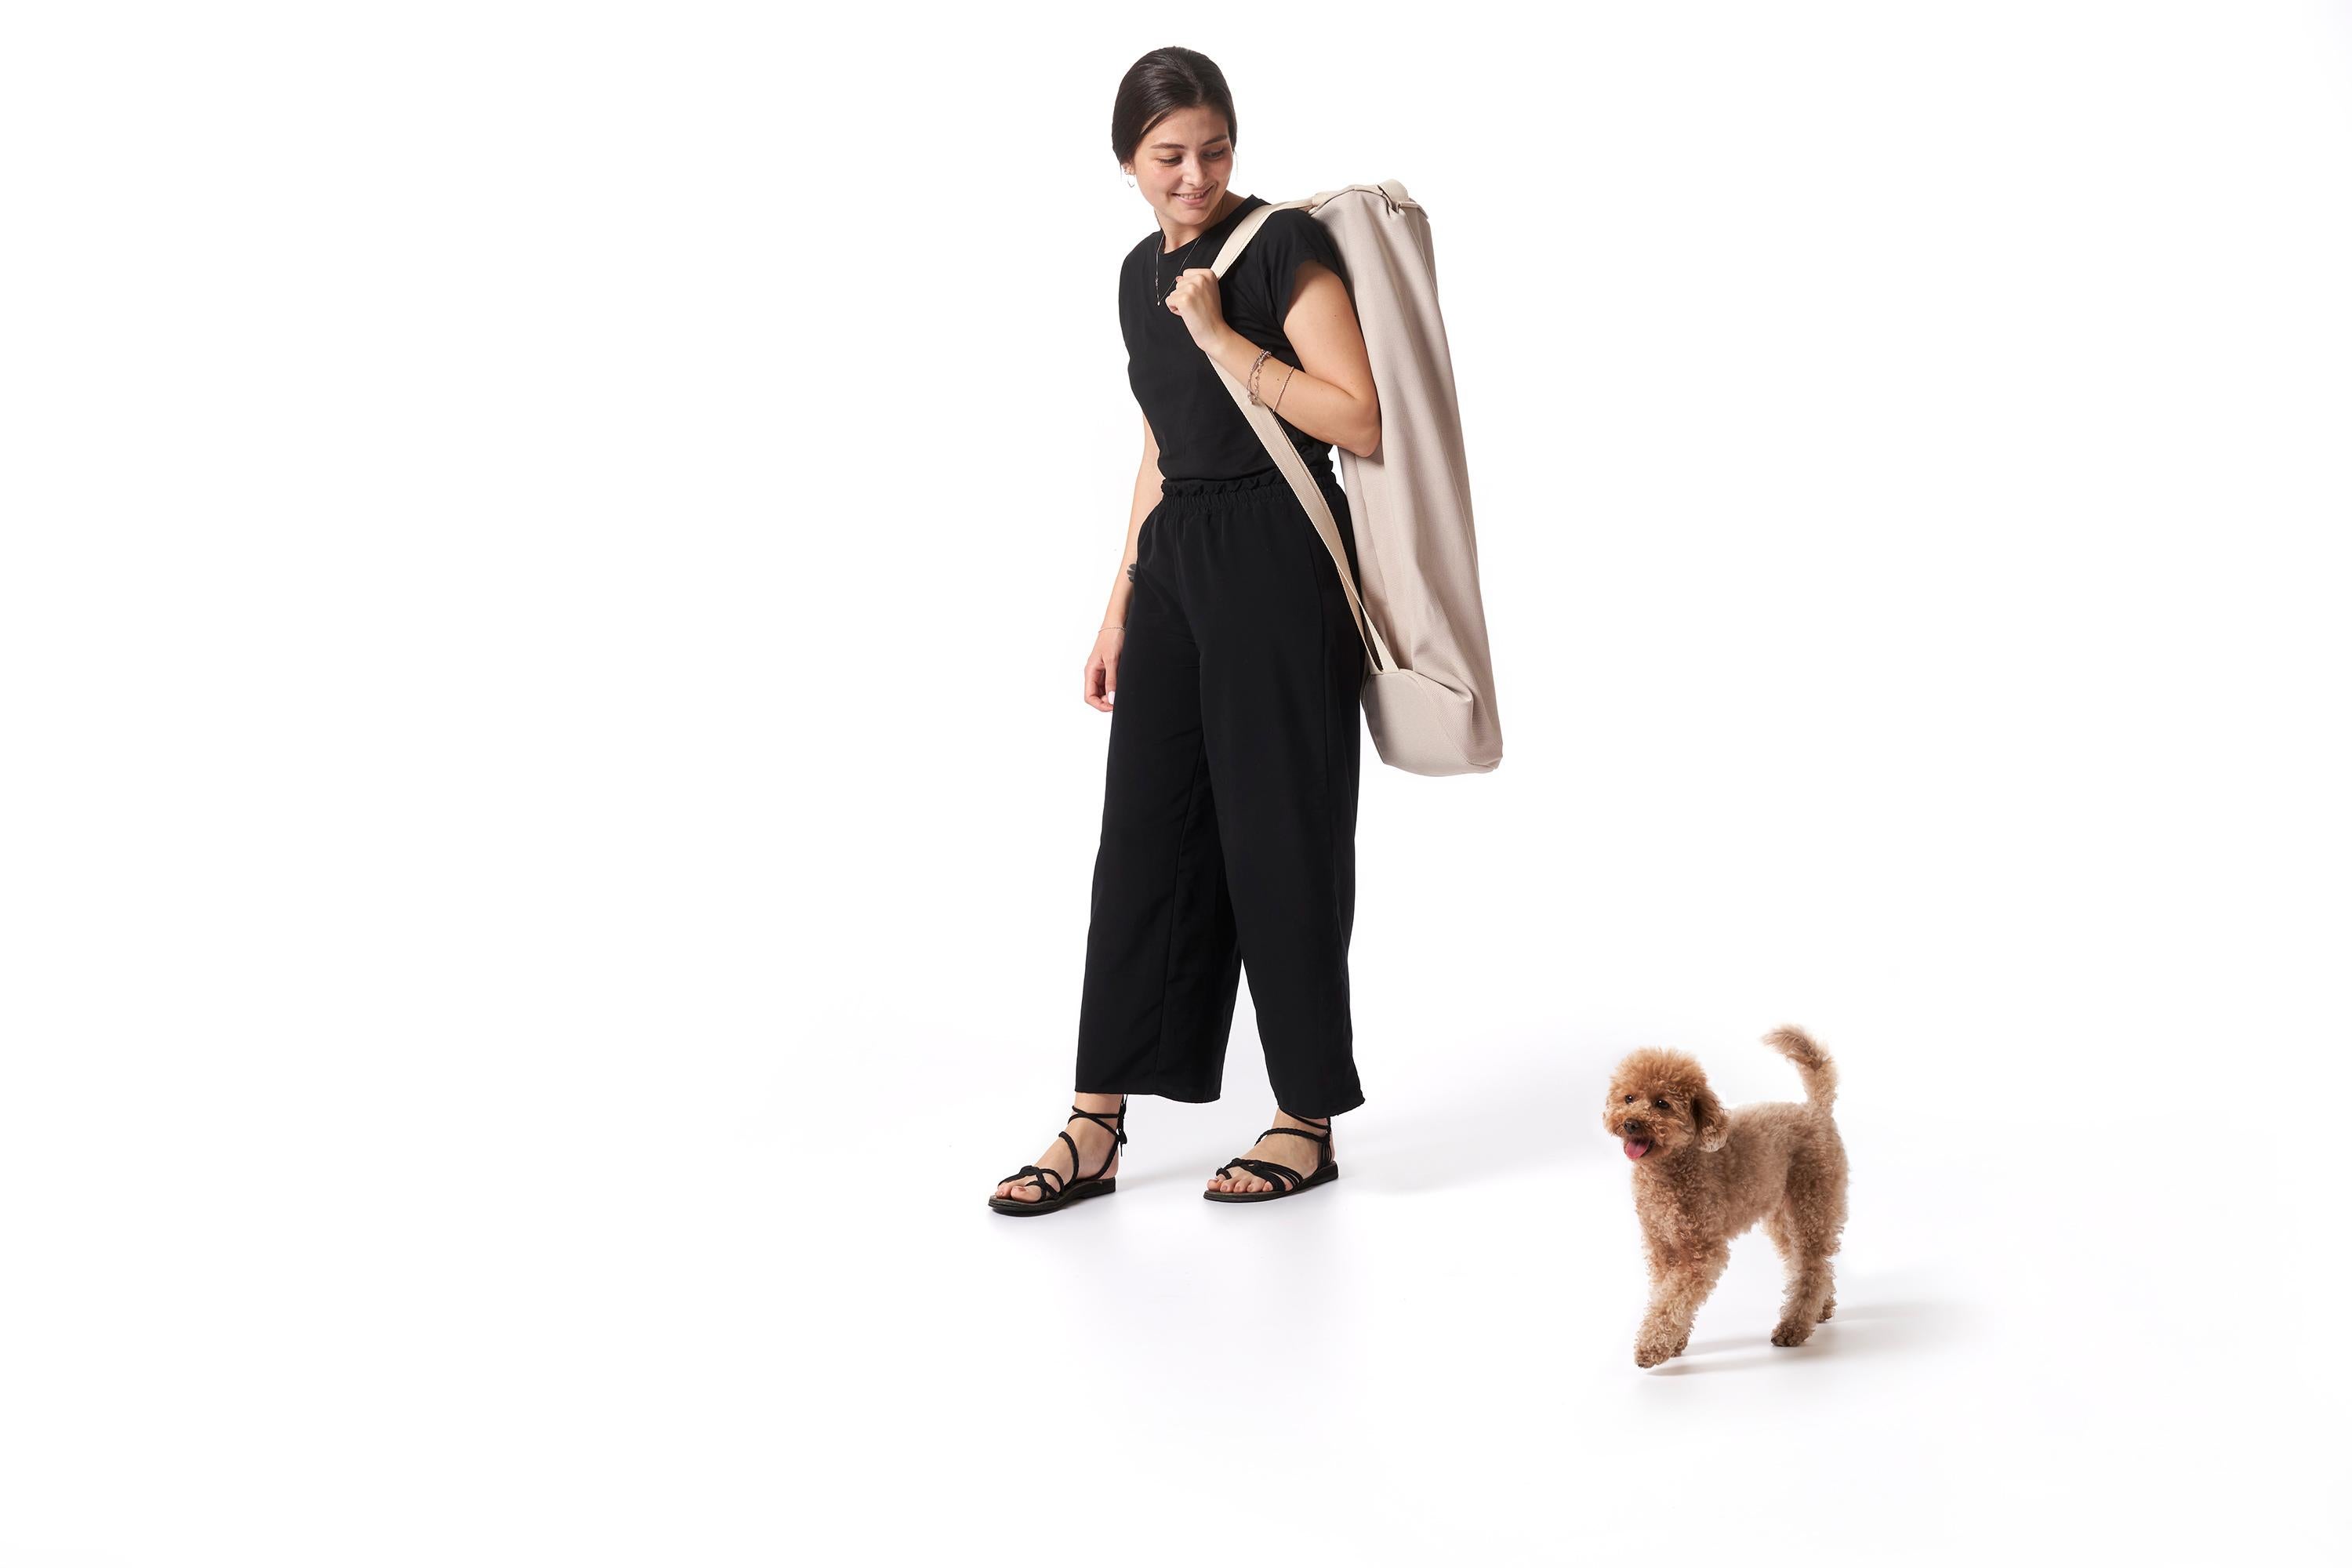 A bed for the relaxation of our furry friends, both at home and on the go. Berberé is the dog bed designed by Raffaella Mangiarotti for Opinion Ciatti which, with this brand new product, enters the world of pet furniture for the first time.